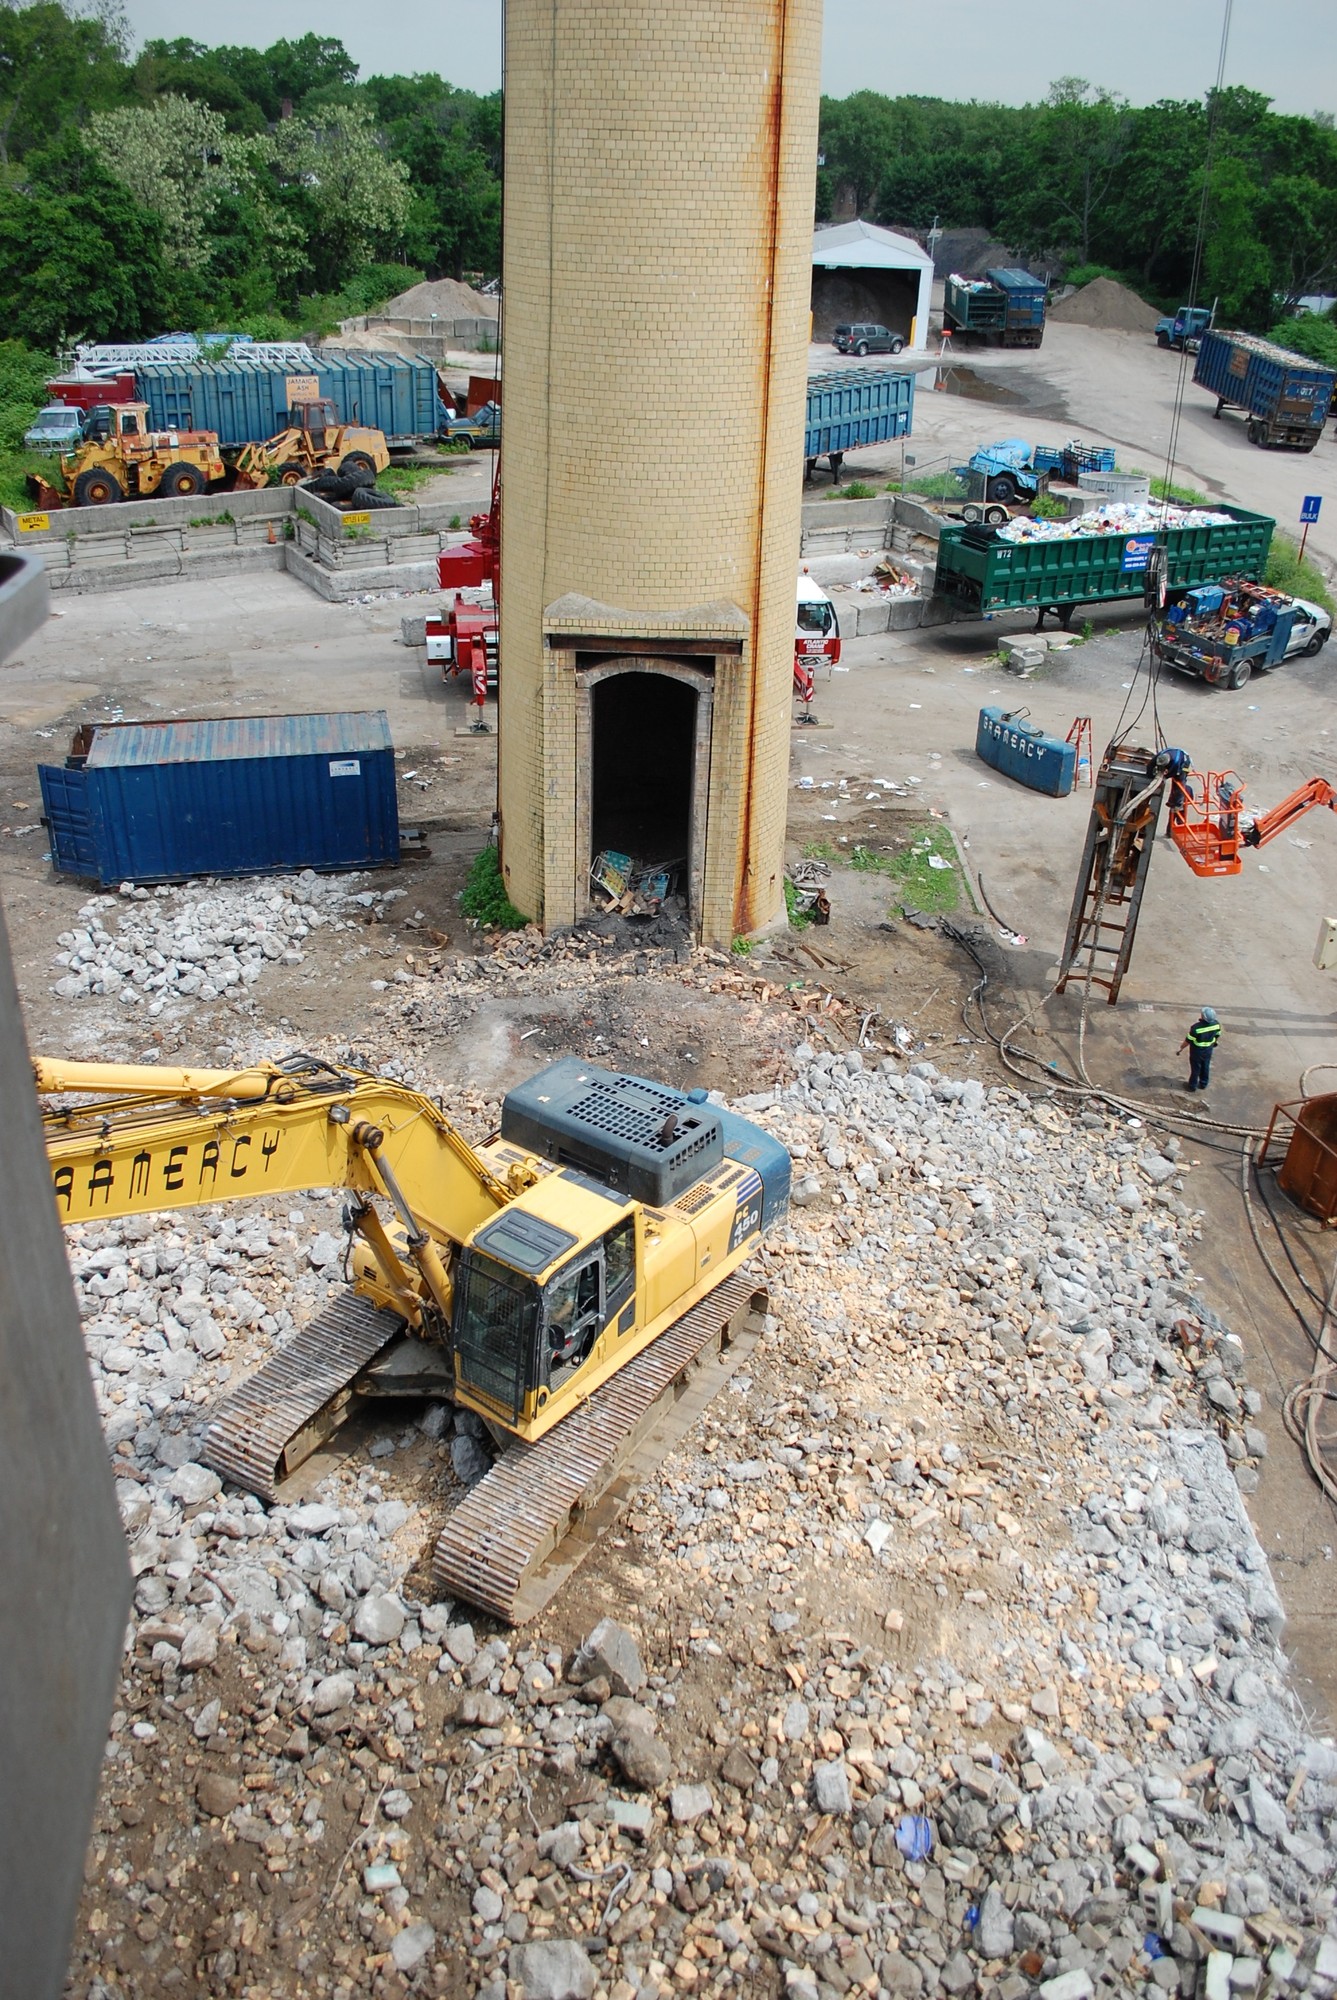 A view of the demolition work from the top floor of the abandoned incinerator building.